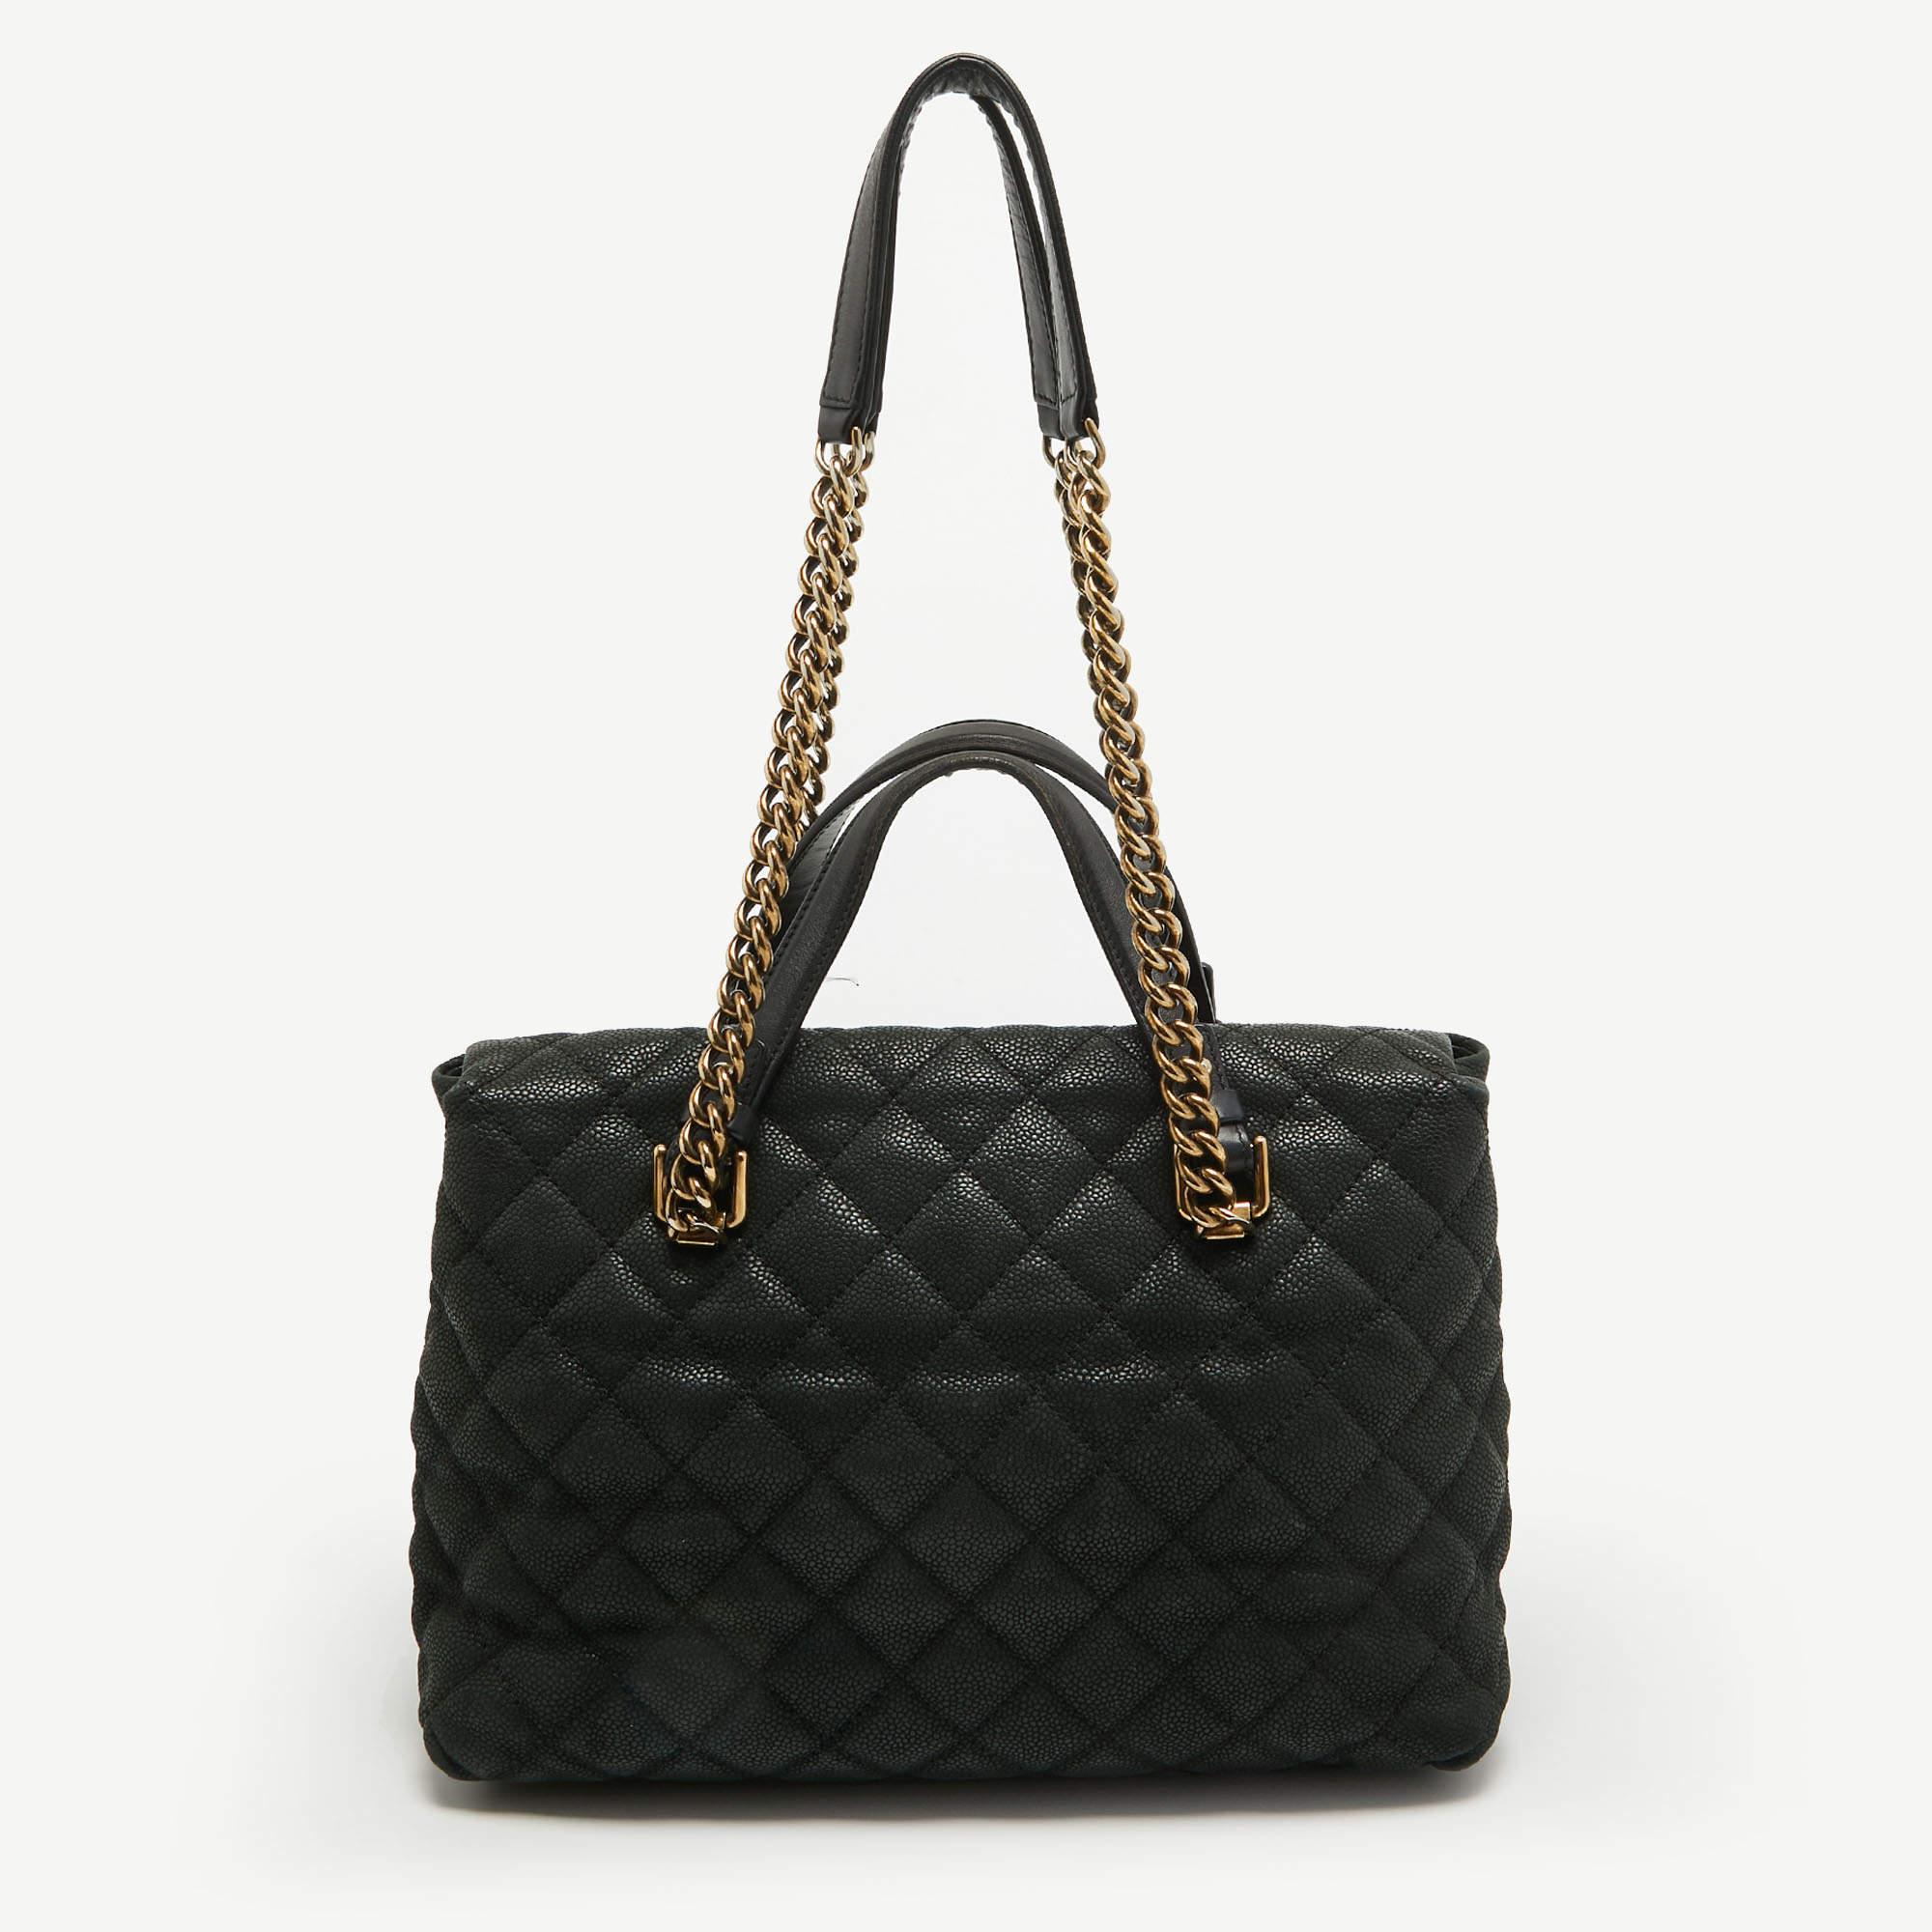 Women's Chanel Black Caviar Leather Chic Quilt Tote